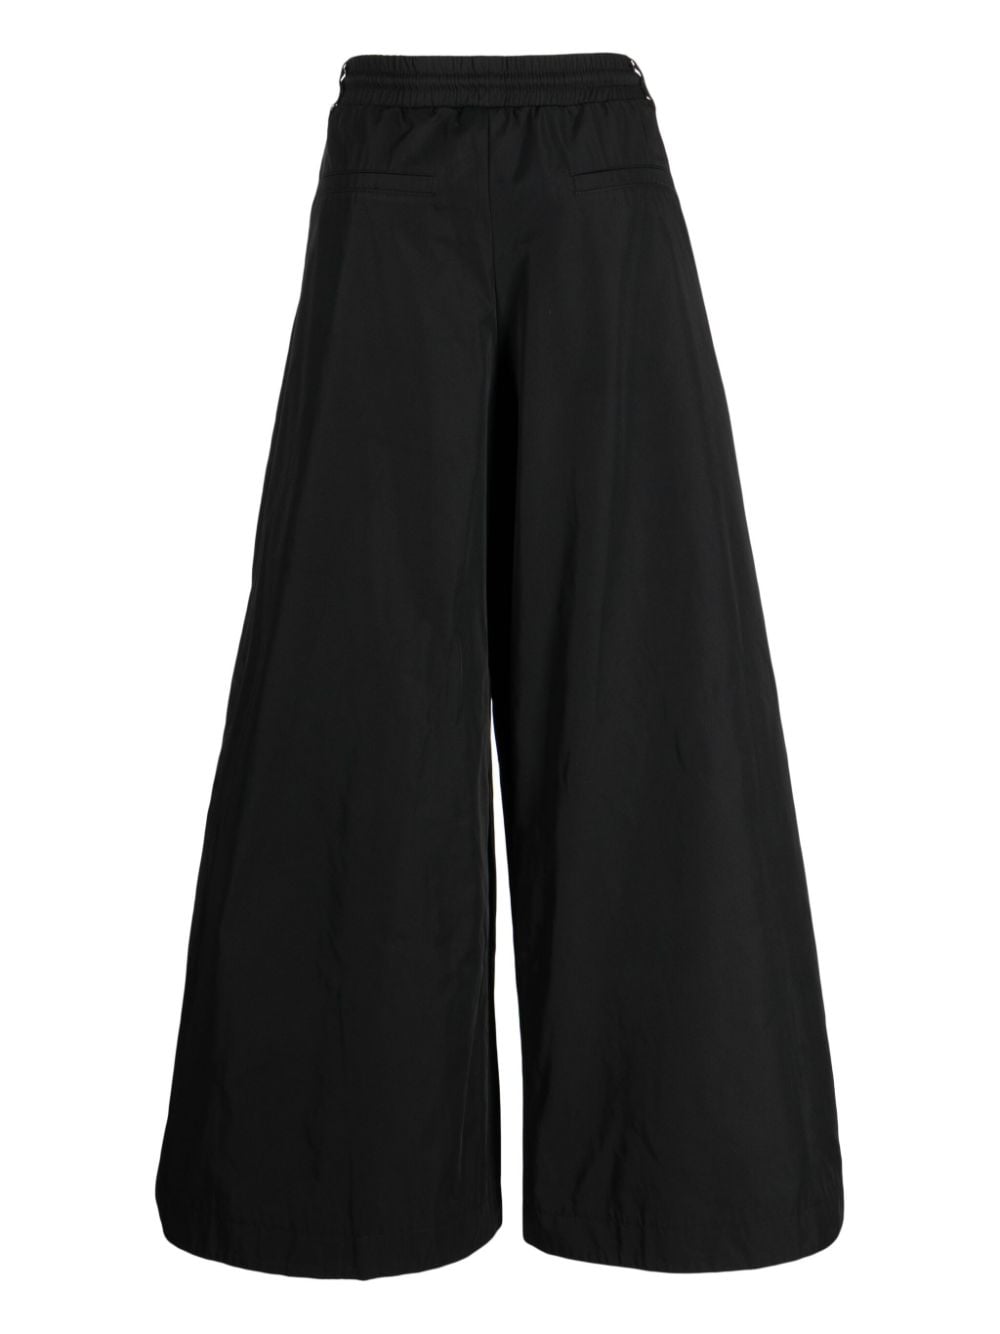 Image 2 of Melitta Baumeister oversized-pockets wide-leg trousers